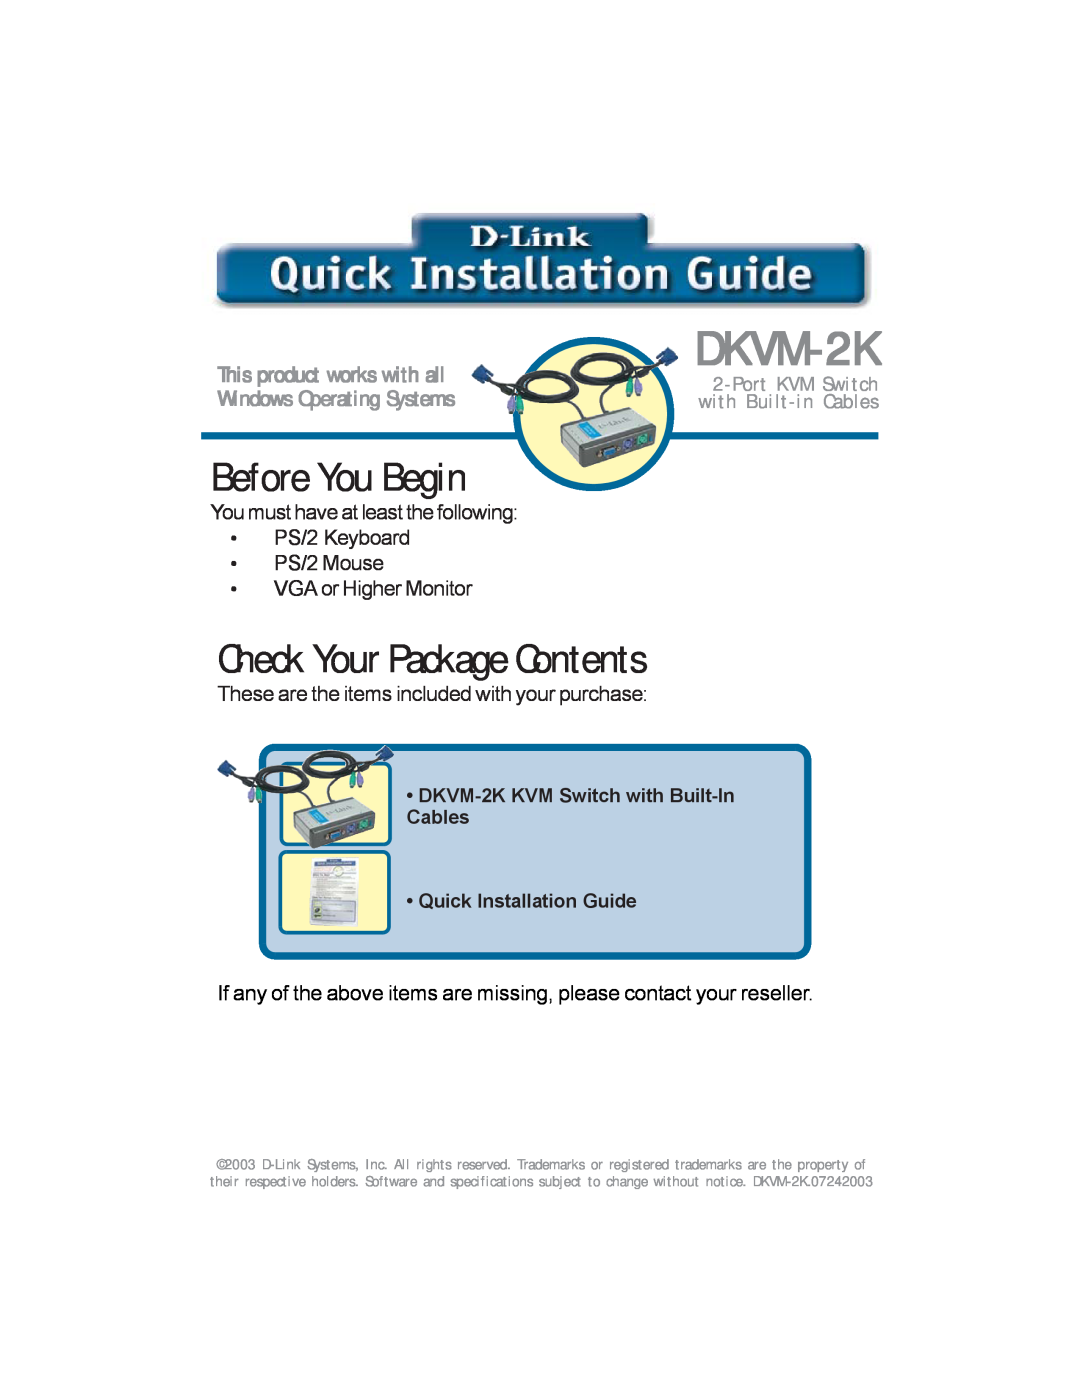 D-Link dkvm-2k specifications Before You Begin, Check Your Package Contents, DKVM-2K, This product works with all 